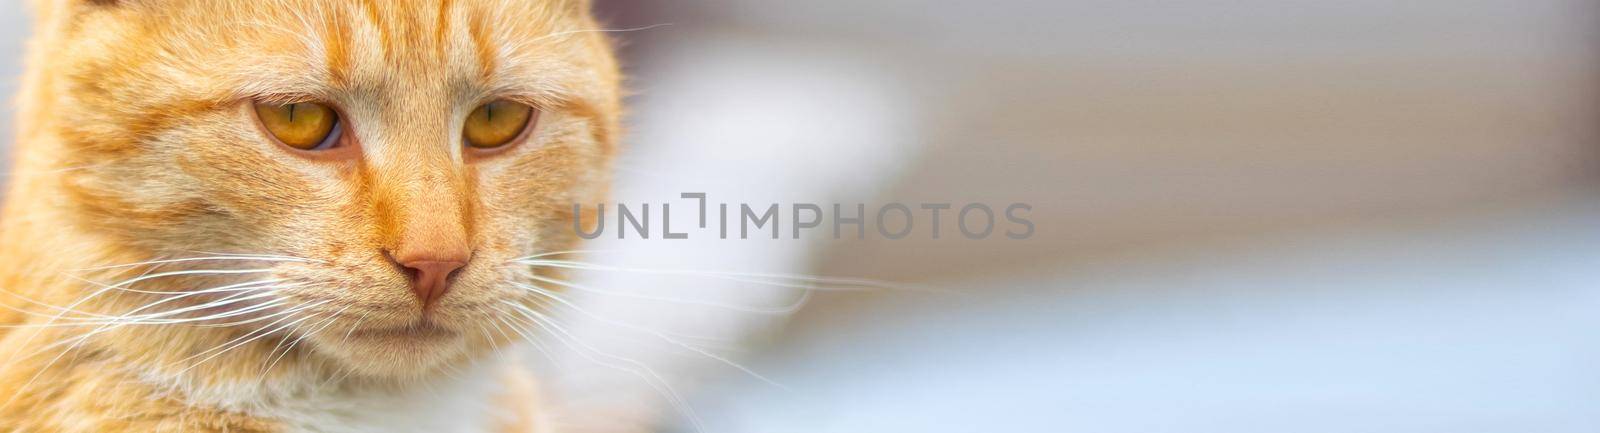 Portrait of a red cat on a blurred background. Red cat face. The concept of animals and pets. Orange tabby cat. Front view. Banner with copy space for website